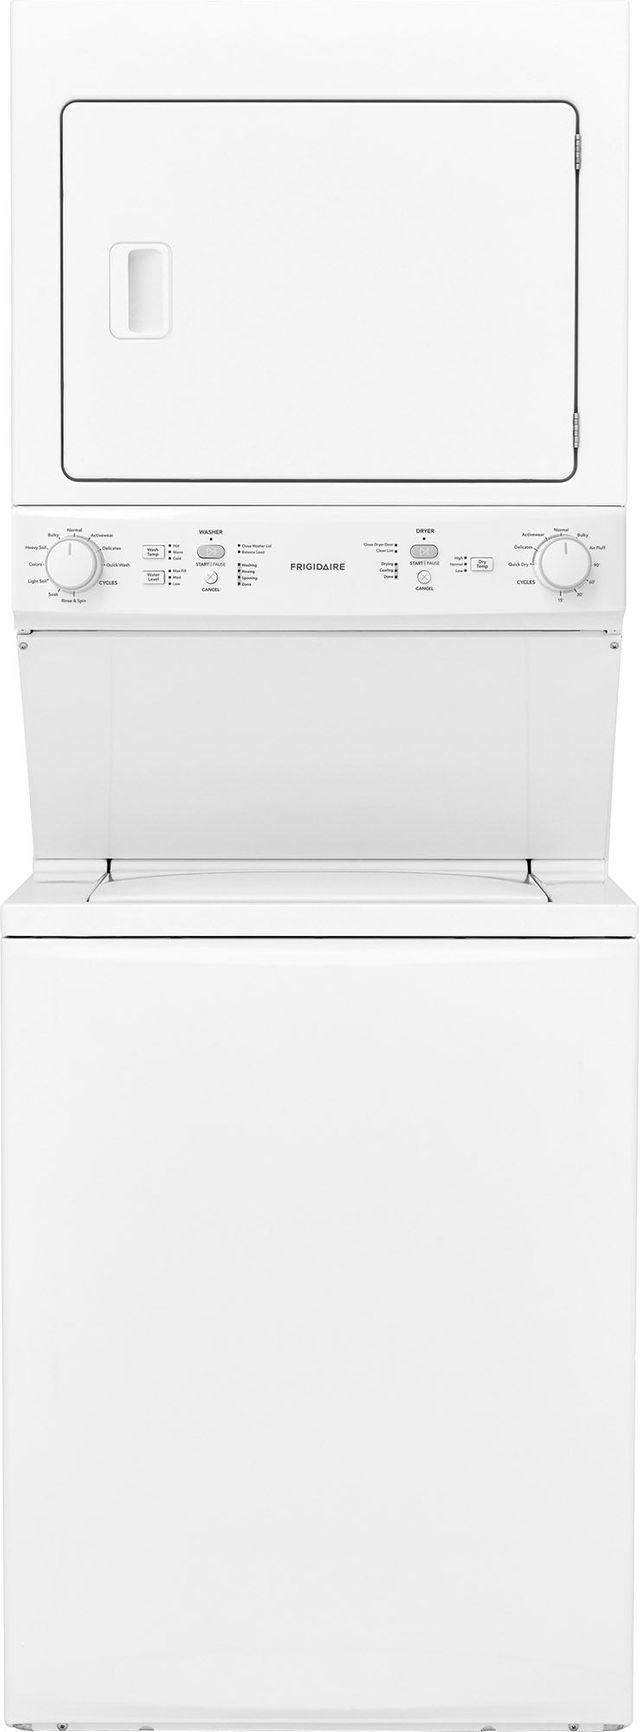 Frigidaire® 3.9 Cu. Ft. Washer, 5.5 Cu. Ft. Dryer White Stack Laundry Center